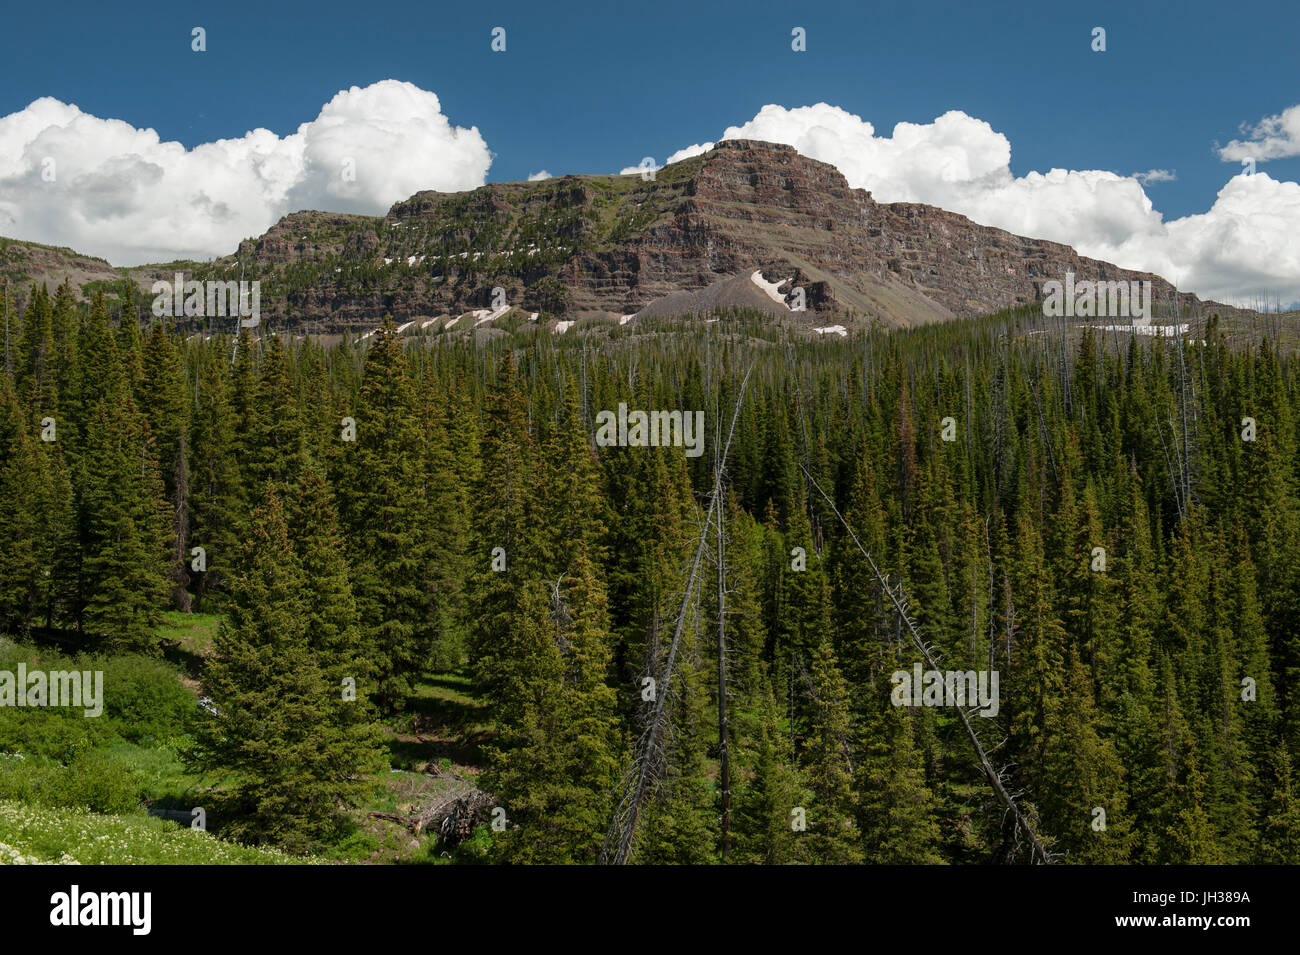 A portion of the Chinese Wall above the Skinny Fish Basin in northwest Colorado's Flat Tops Wilderness. Stock Photo